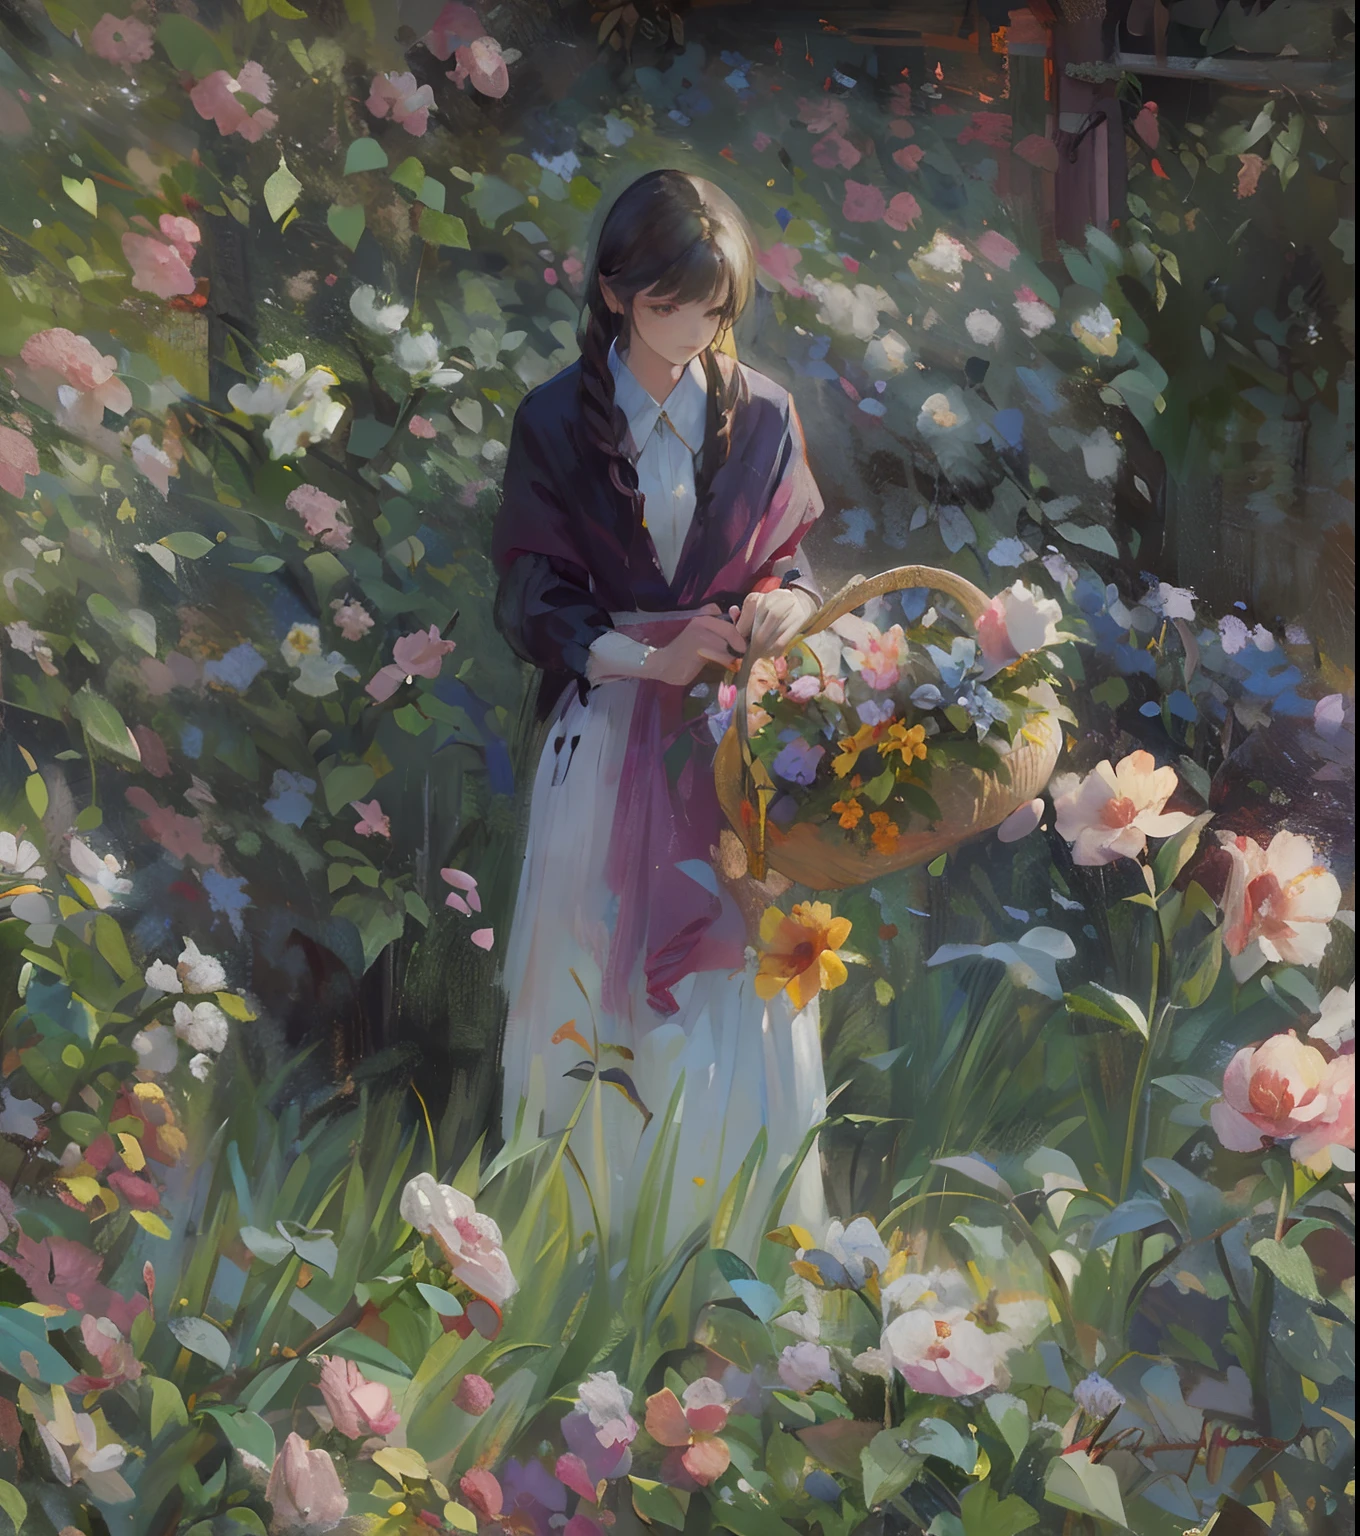 painting of a woman in a garden with flowers and a basket of flowers, picking flowers, 24k resolution, artistic, impressionism, hyperdetailed,